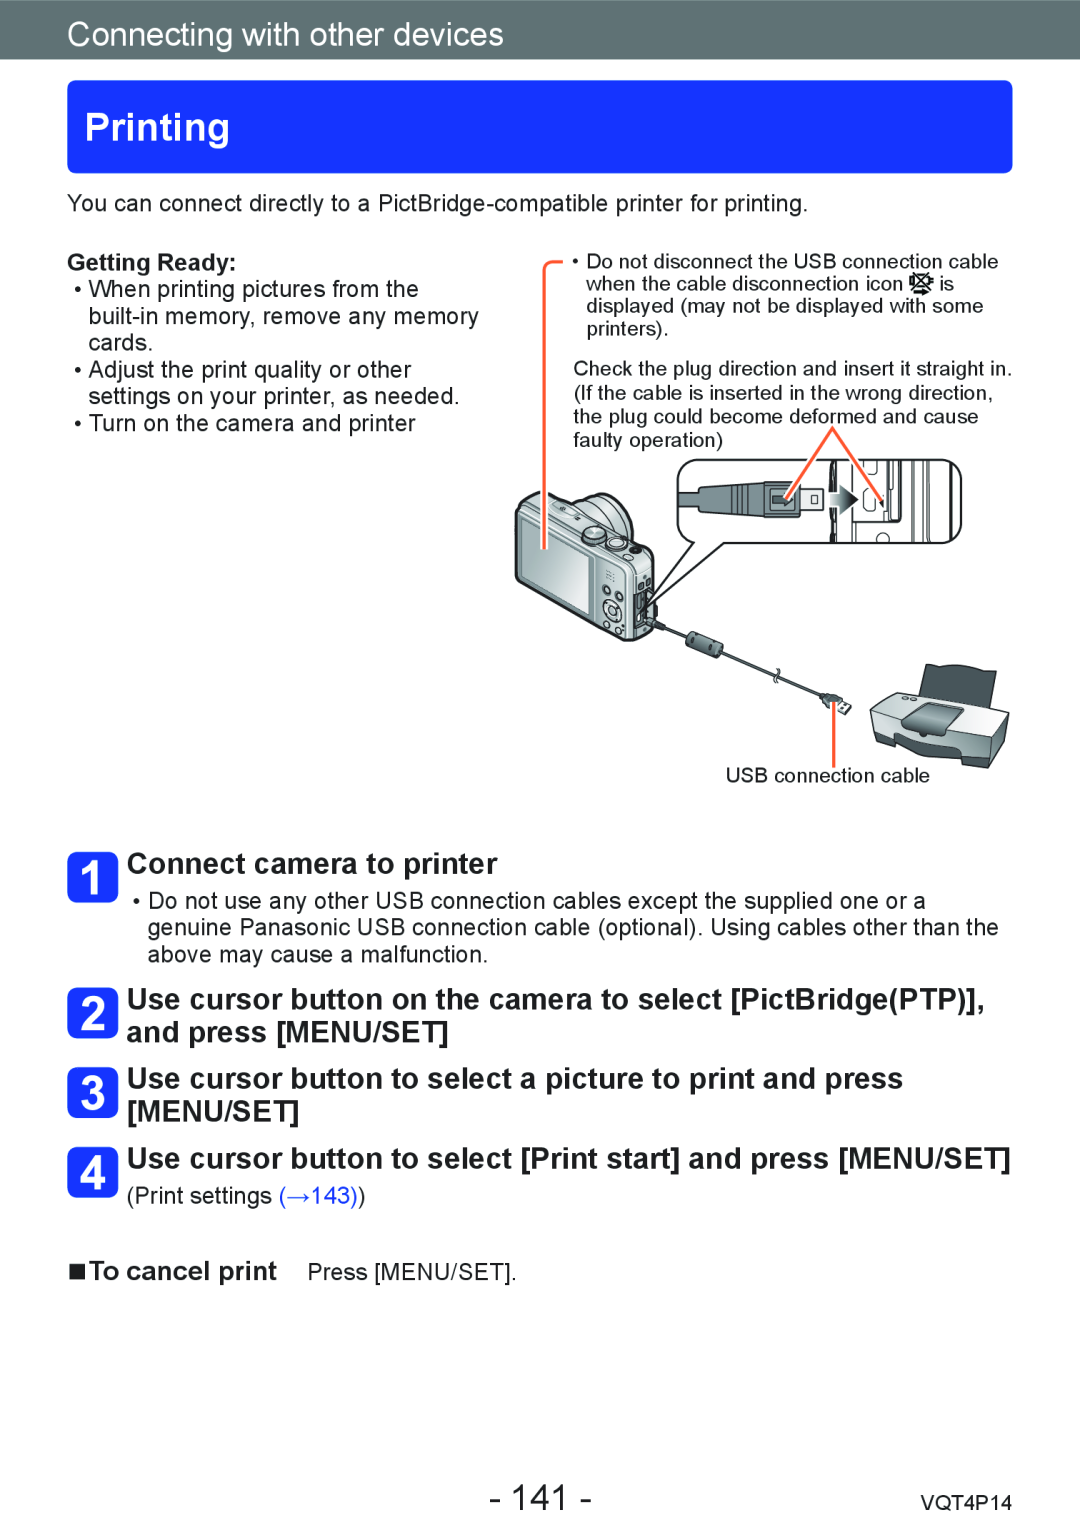 Panasonic DMCZS25K Printing, Connect camera to printer, Use cursor button to select a picture to print and press MENU/SET 